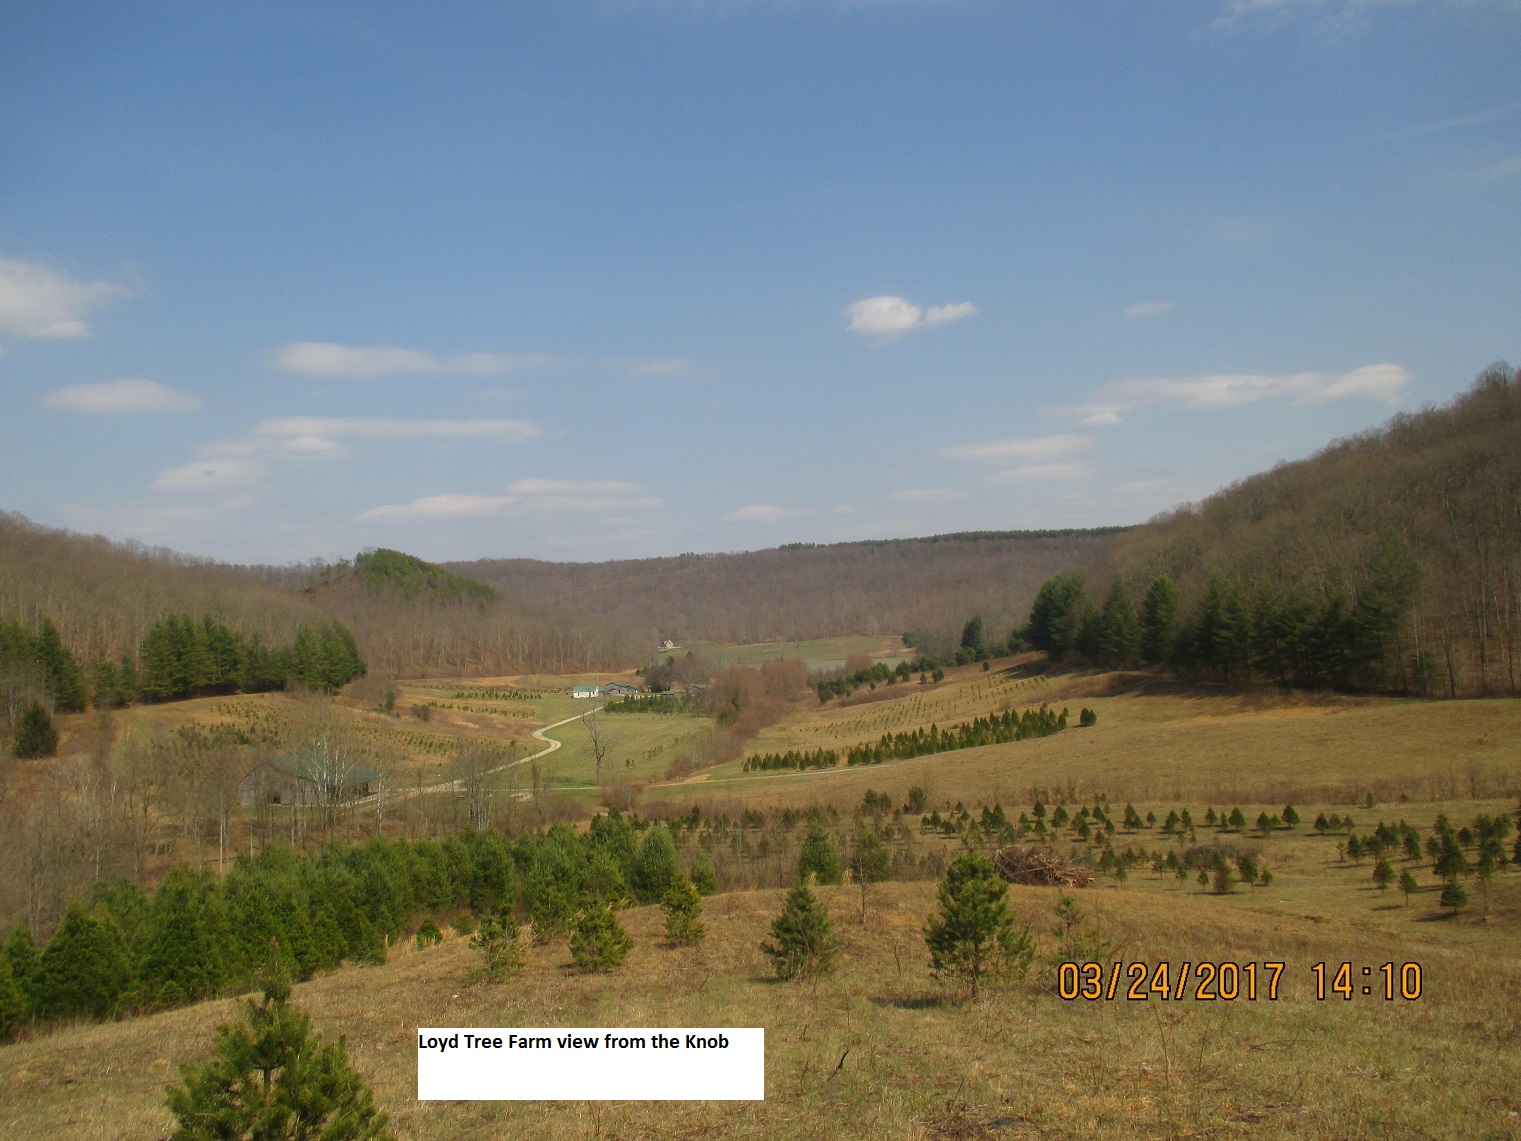 View of the Kentucky property